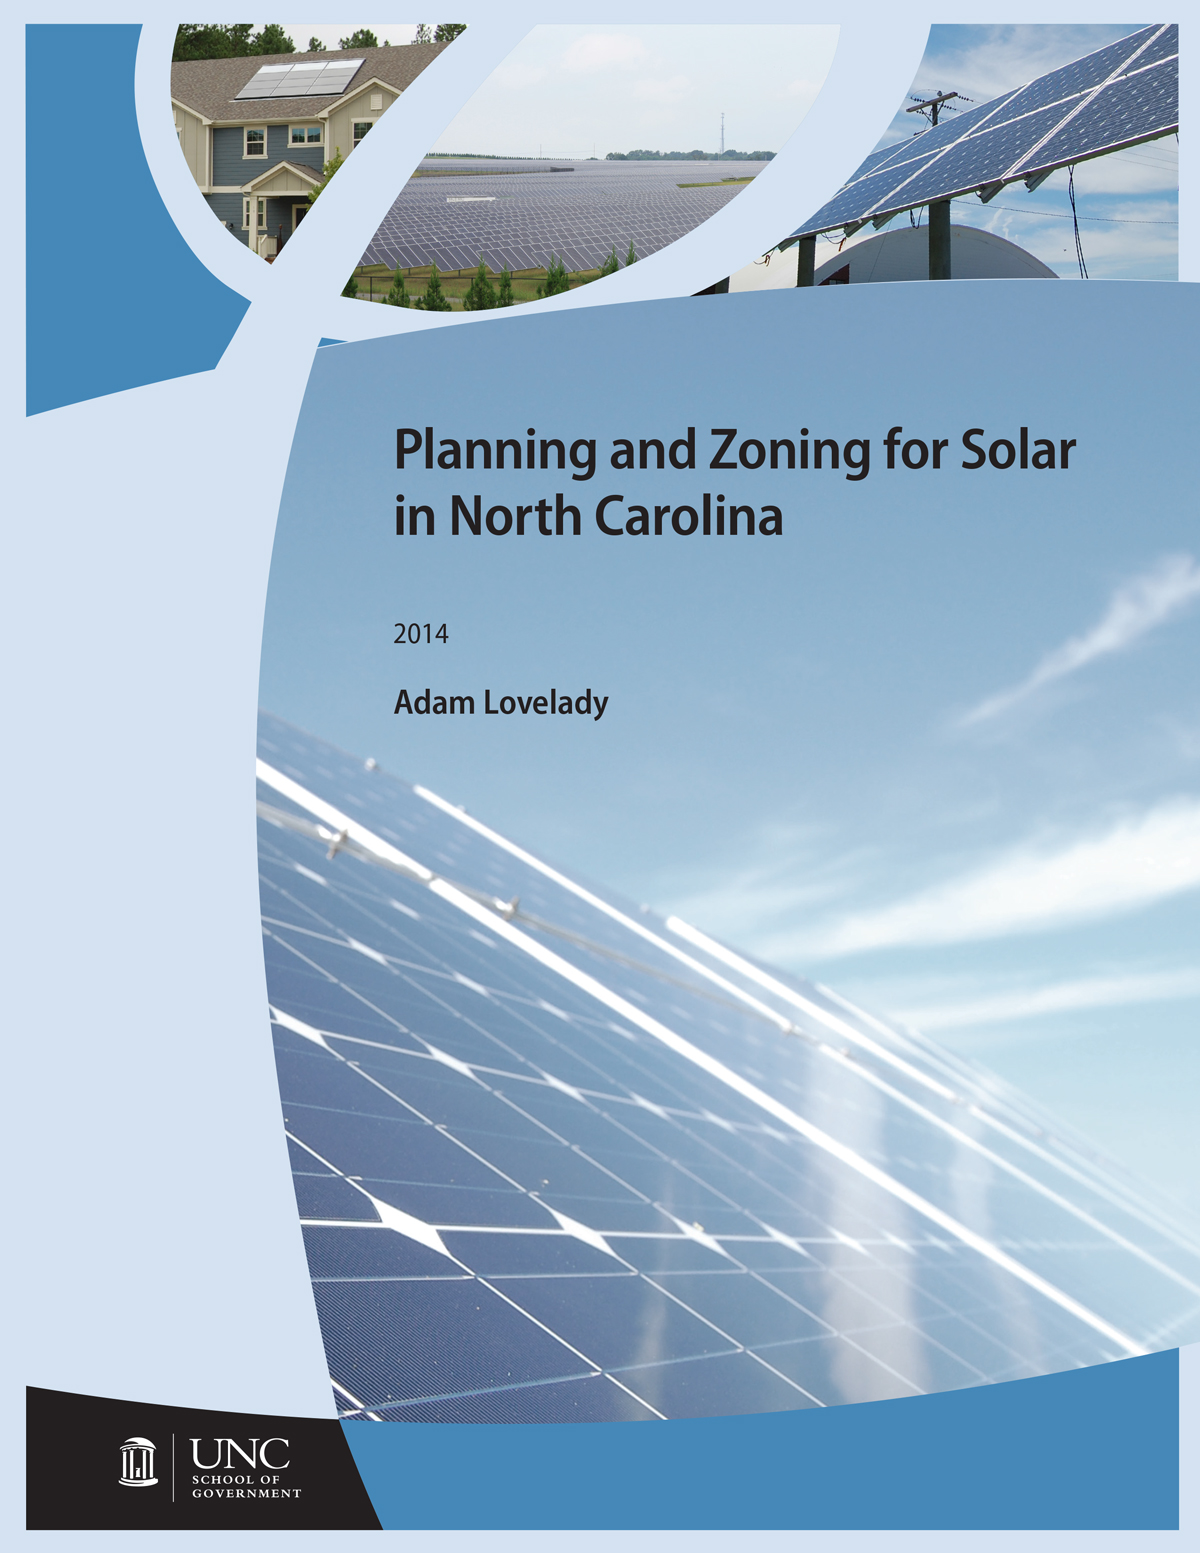 Planning and Zoning for Solar in North Carolina, by Adam Lovelady, 2014